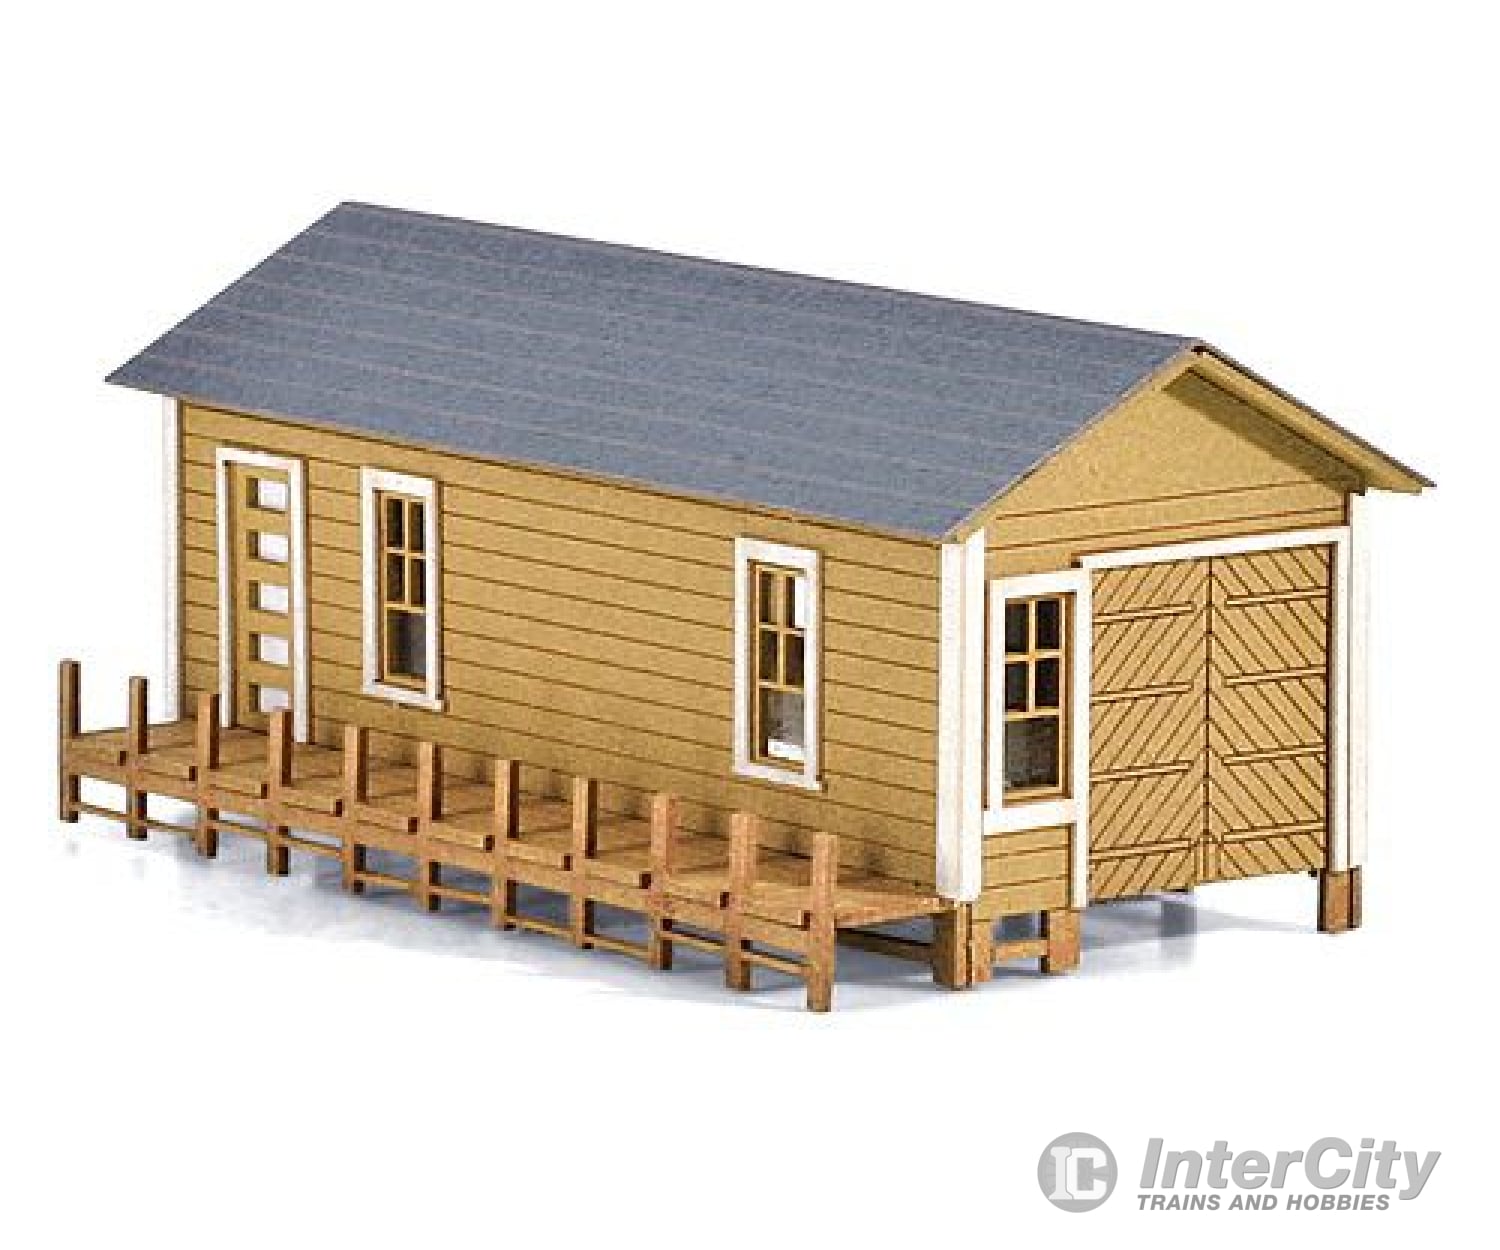 Micro Trains N 49990925 Boat House - Kit (Laser-Cut Wood) Structures